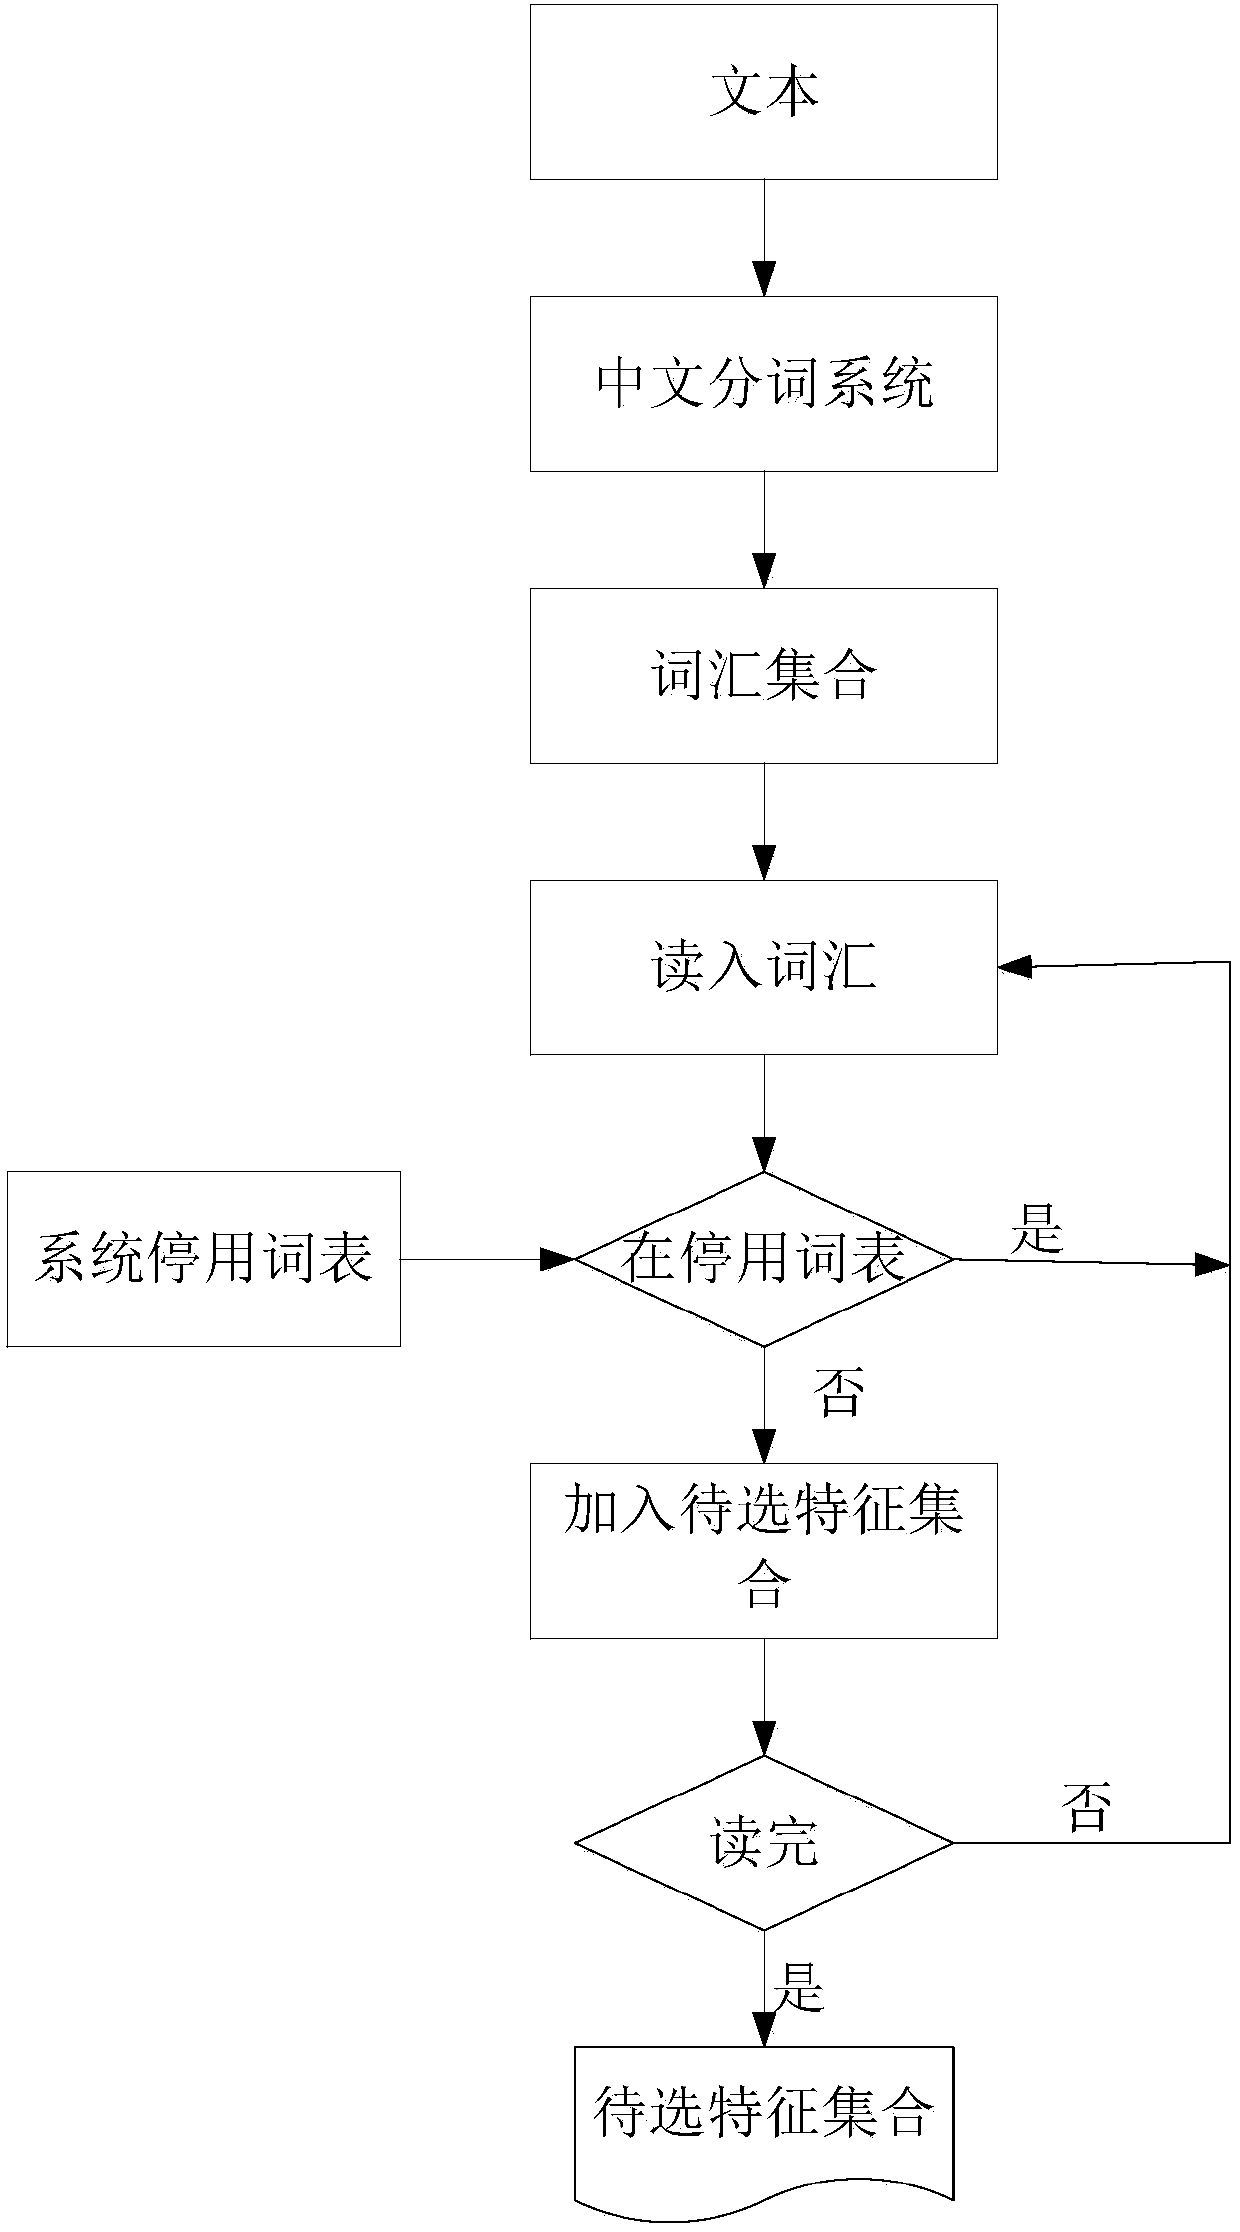 New small world network model realization text feature extraction method